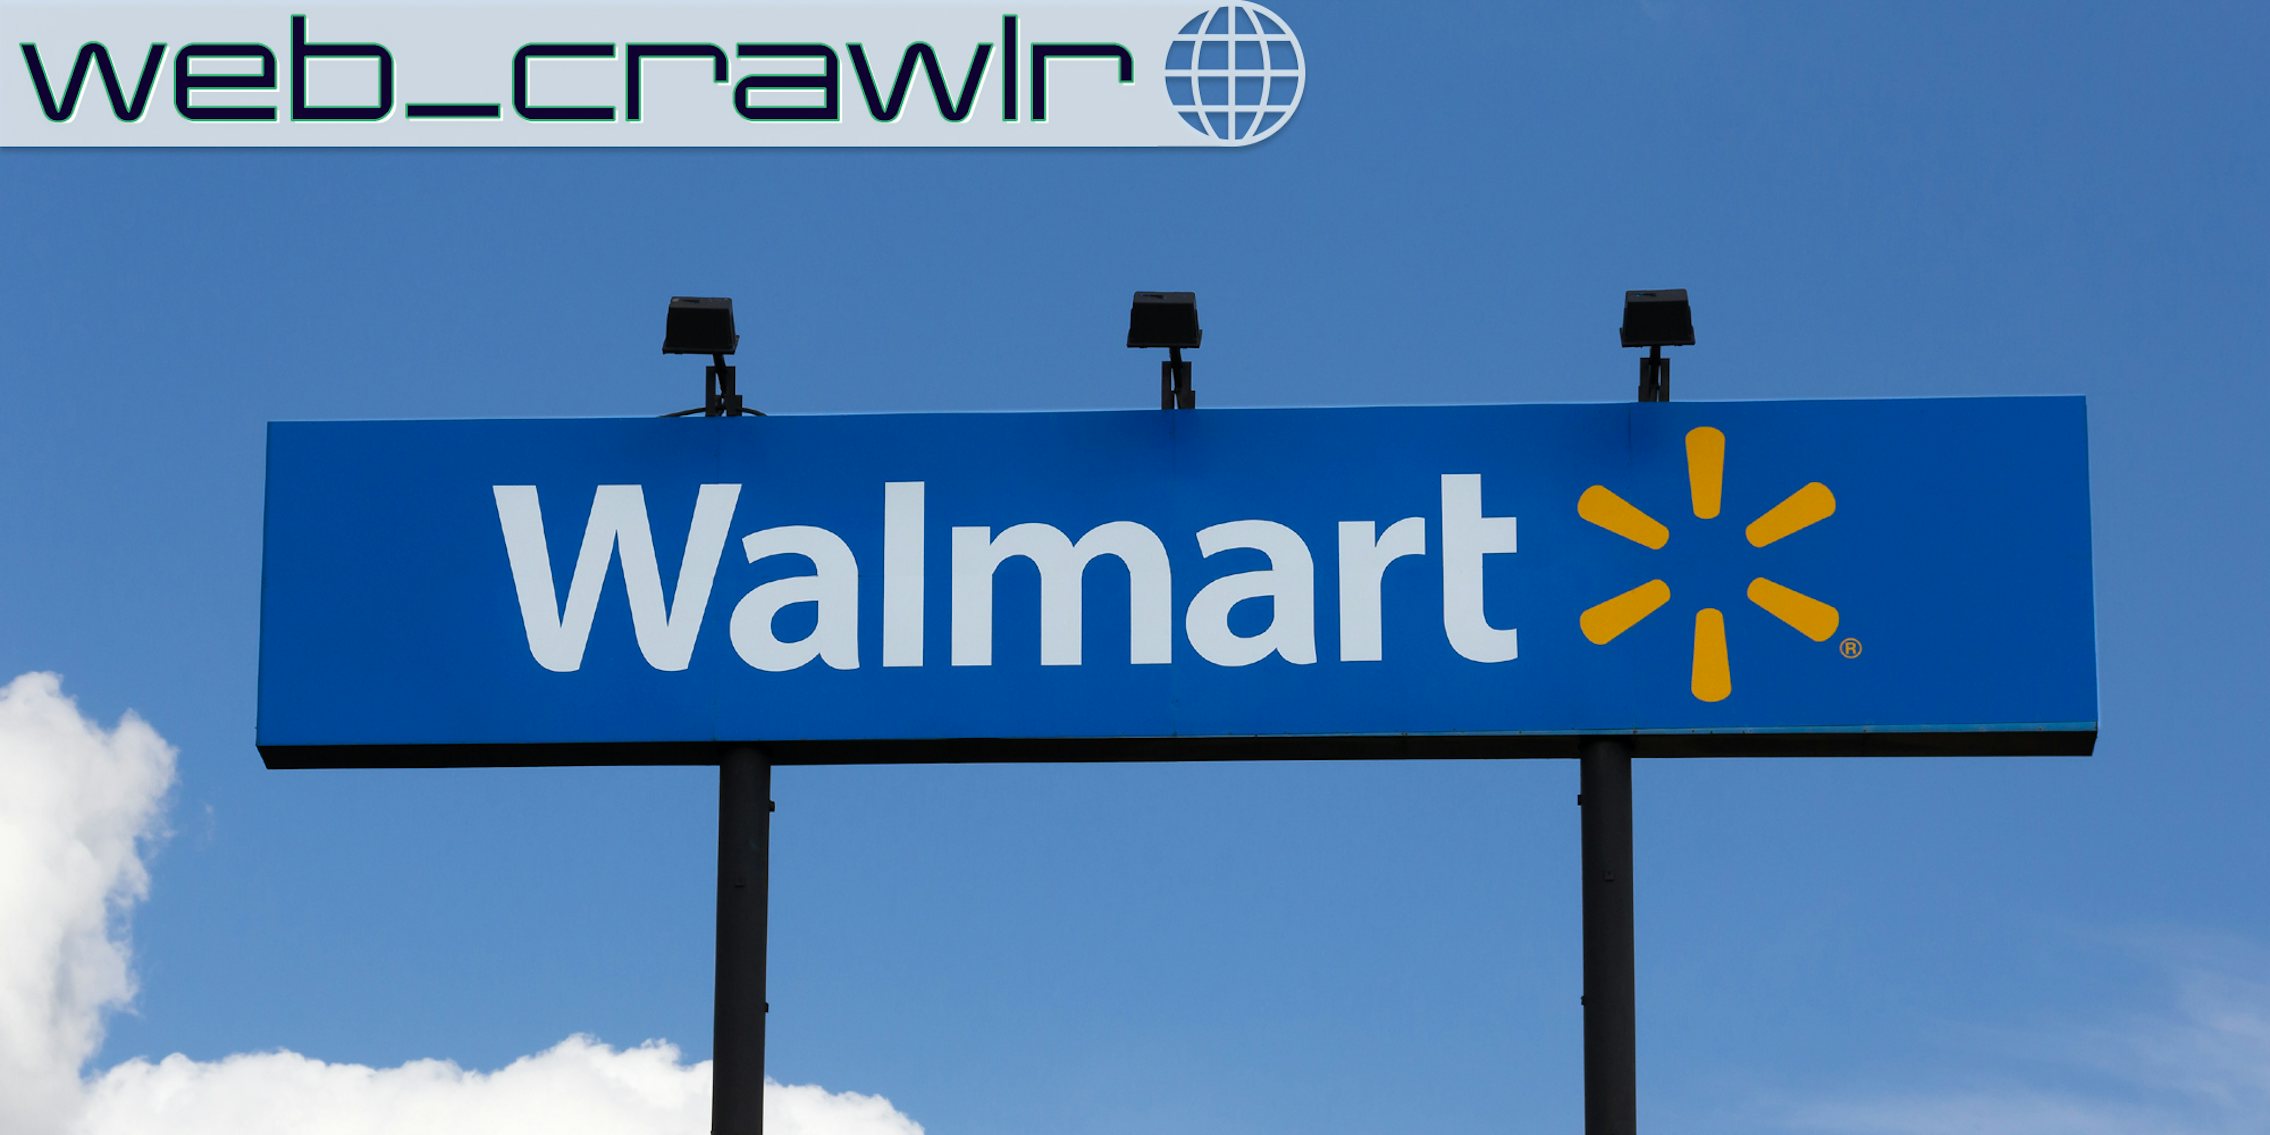 A Walmart sign. The Daily Dot newsletter web_crawlr logo is in the top left corner.